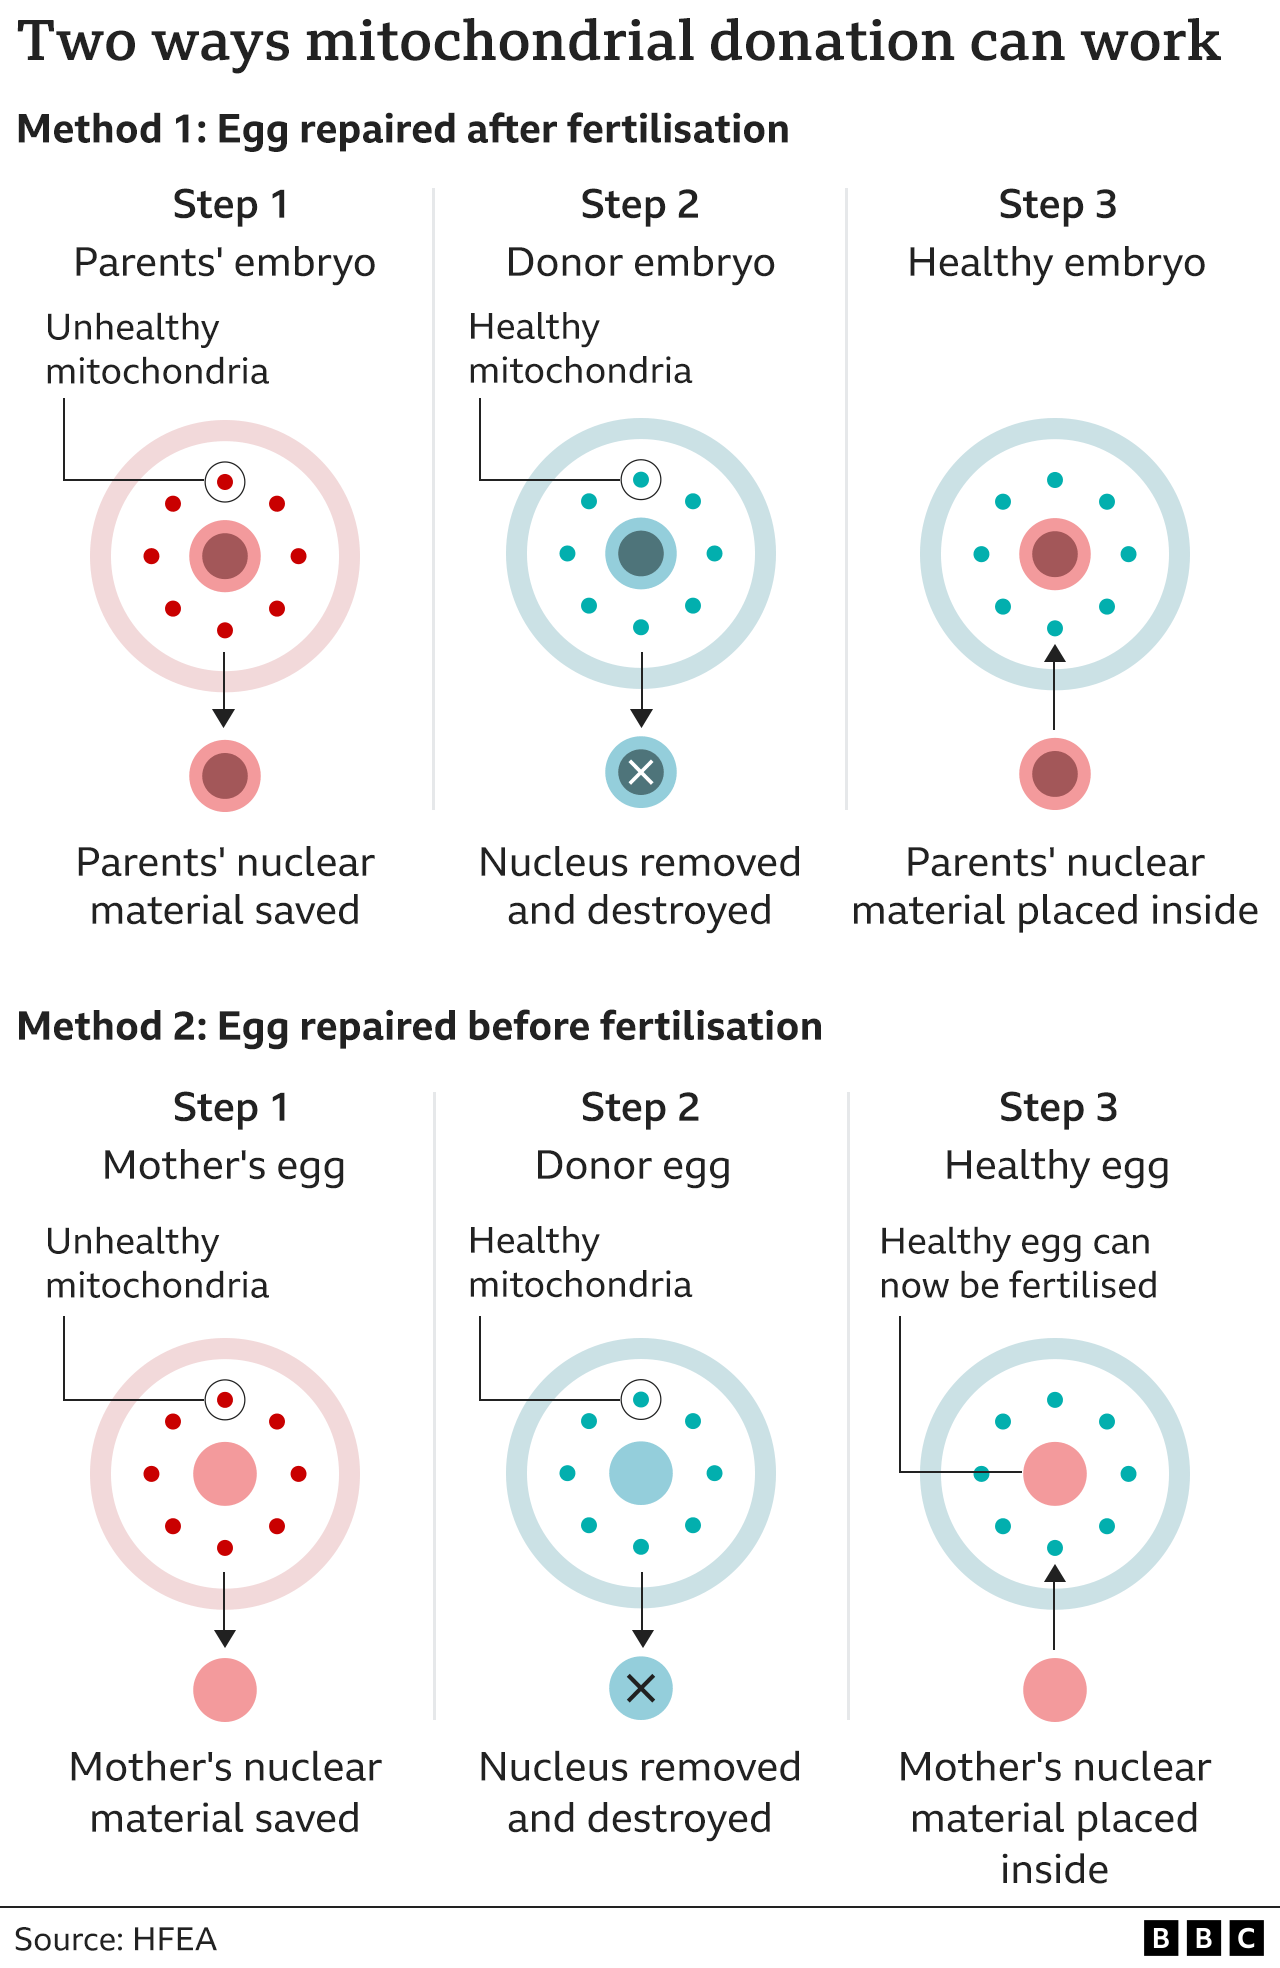 Graphic showing the two ways mitochondrial donation can work: with the nuclear material taken from the parents' unhealthy embryo after fertilisation and replacing the nucleus in the healthy donor embryo; or the nuclear material being taken from the mother's unhealthy unfertilised egg and replacing the nucleus in the donor egg ready to be fertilised